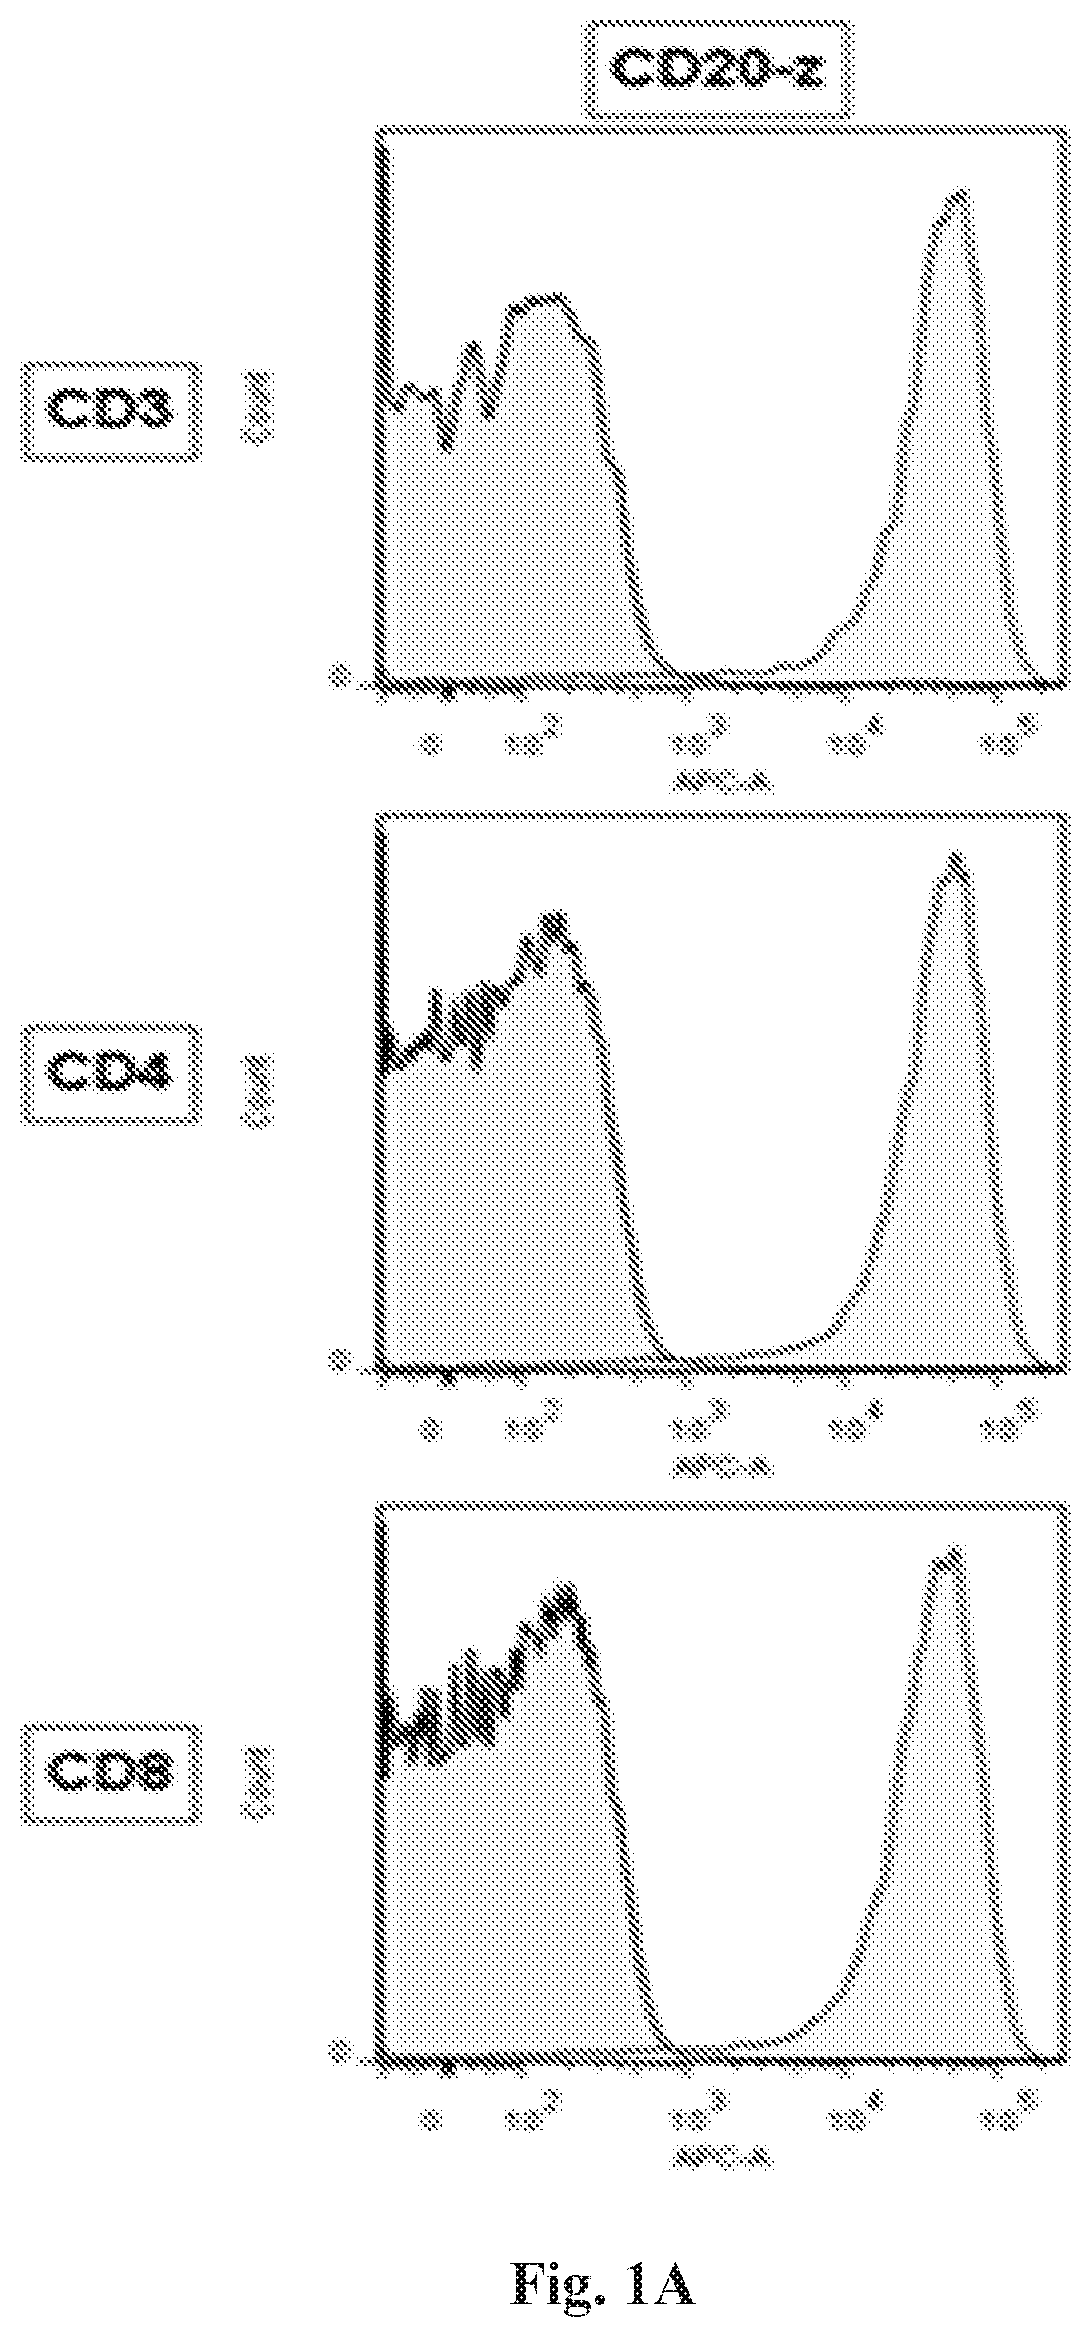 Treatment of a canine cd20 positive disease or condition using a canine cd20-specific chimeric antigen receptor